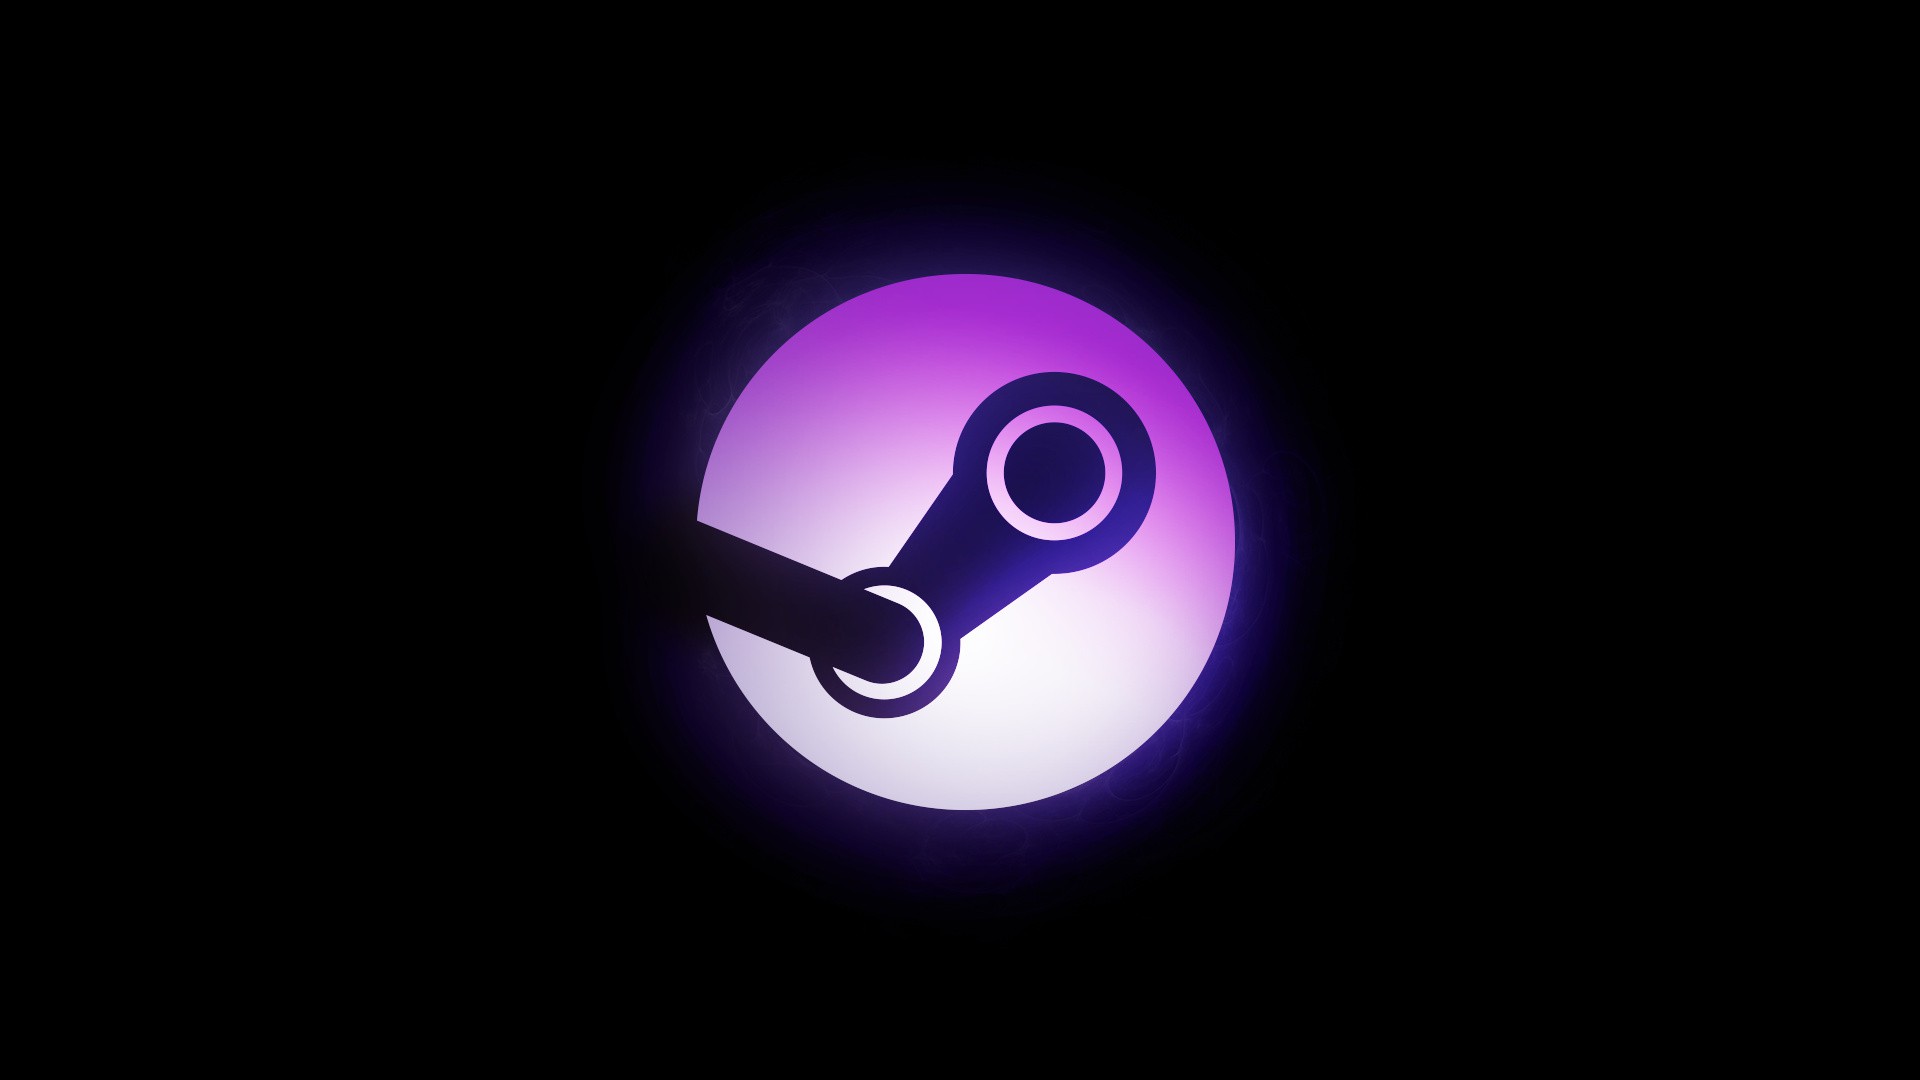 Gabe Newell outlines the future of the Steam Machines